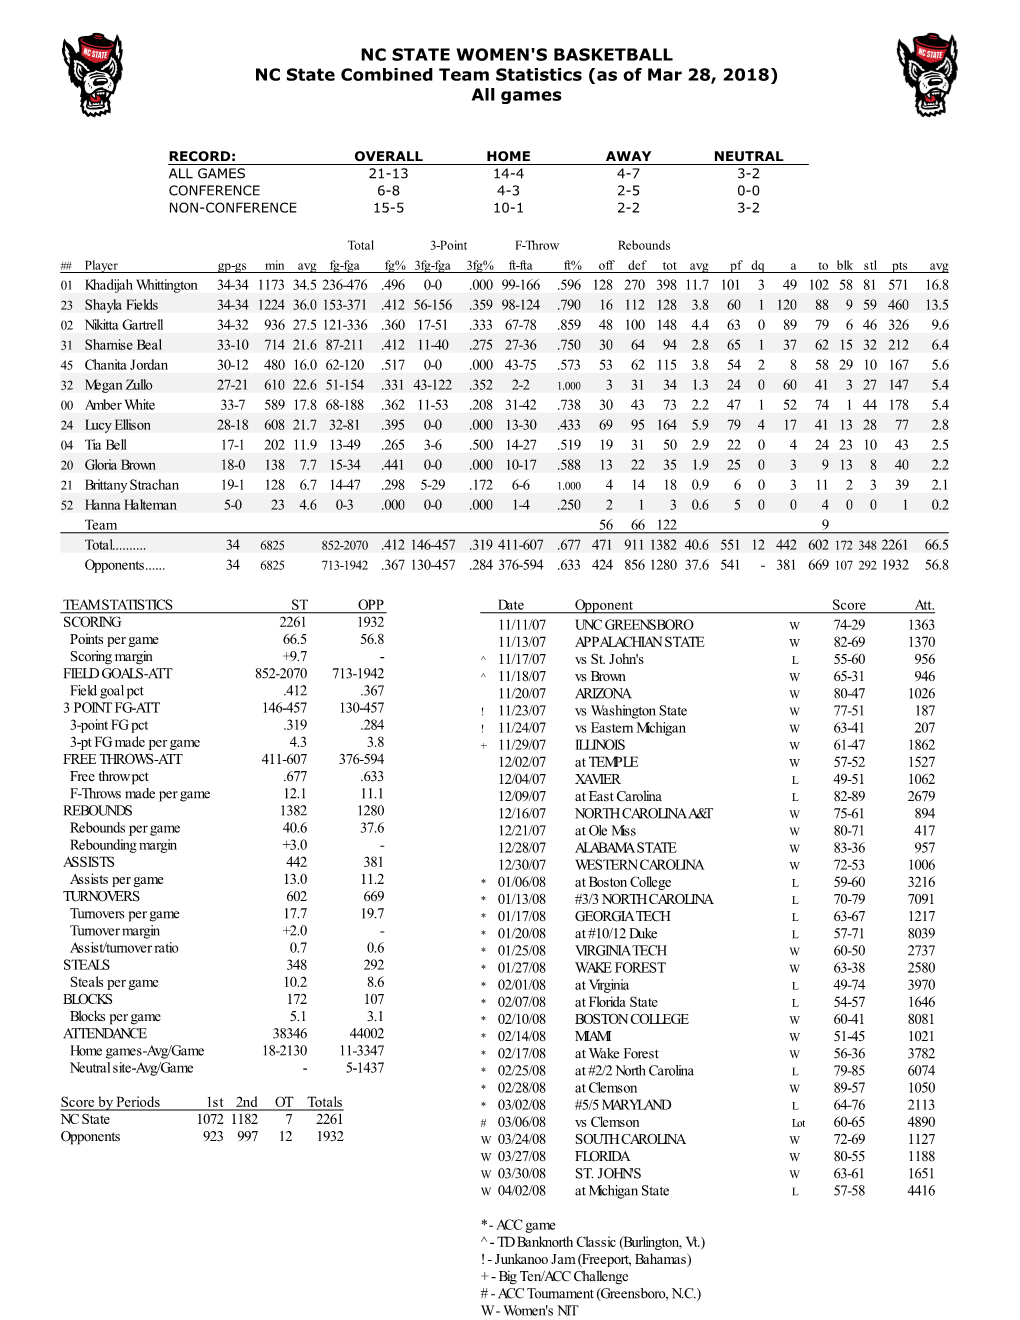 NC STATE WOMEN's BASKETBALL NC State Combined Team Statistics (As of Mar 28, 2018) All Games